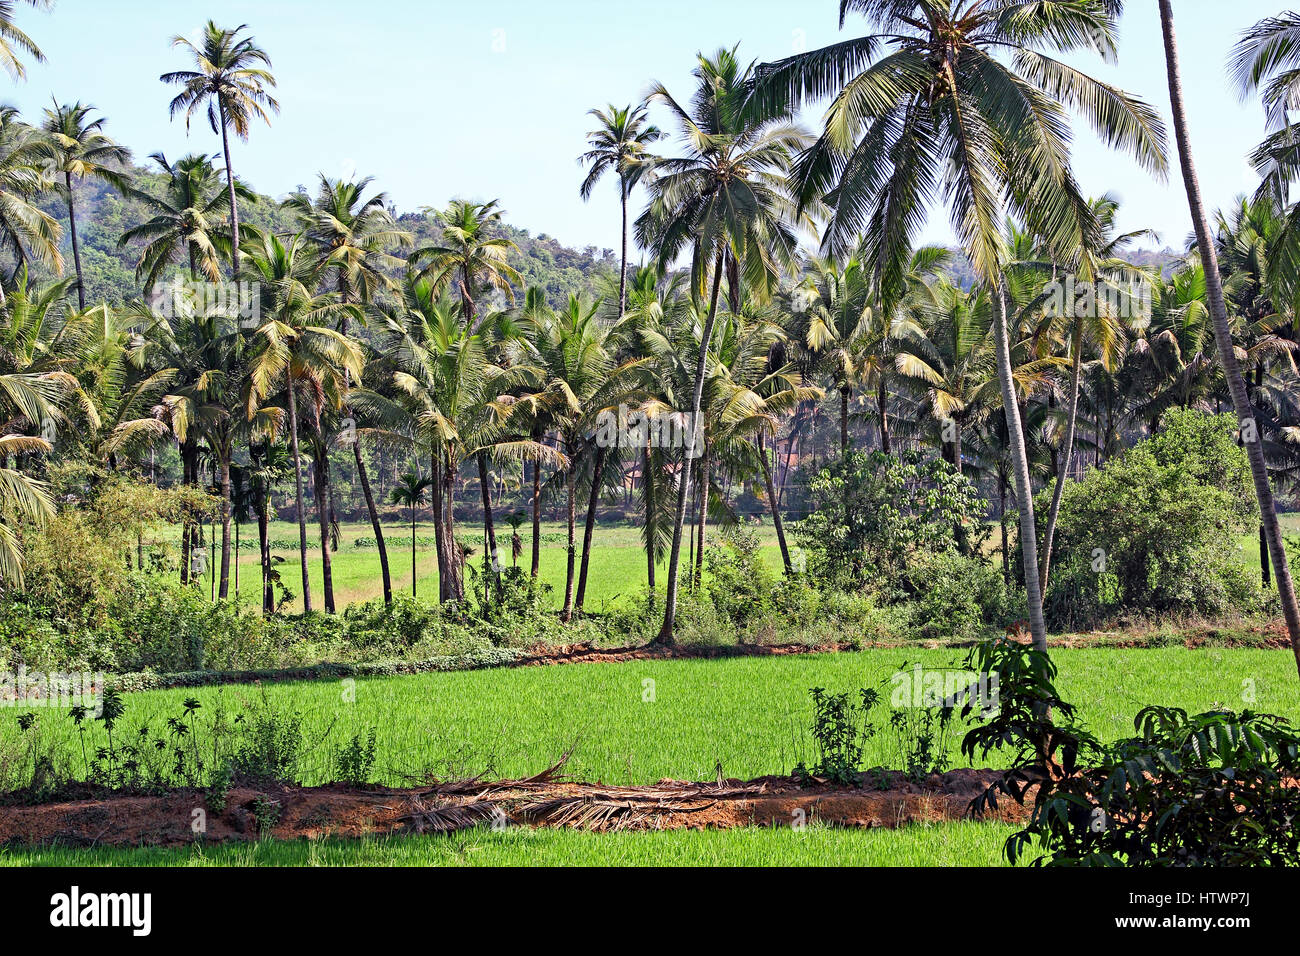 Inter crop of paddy and coconut cultivation in Goa, India. Stock Photo